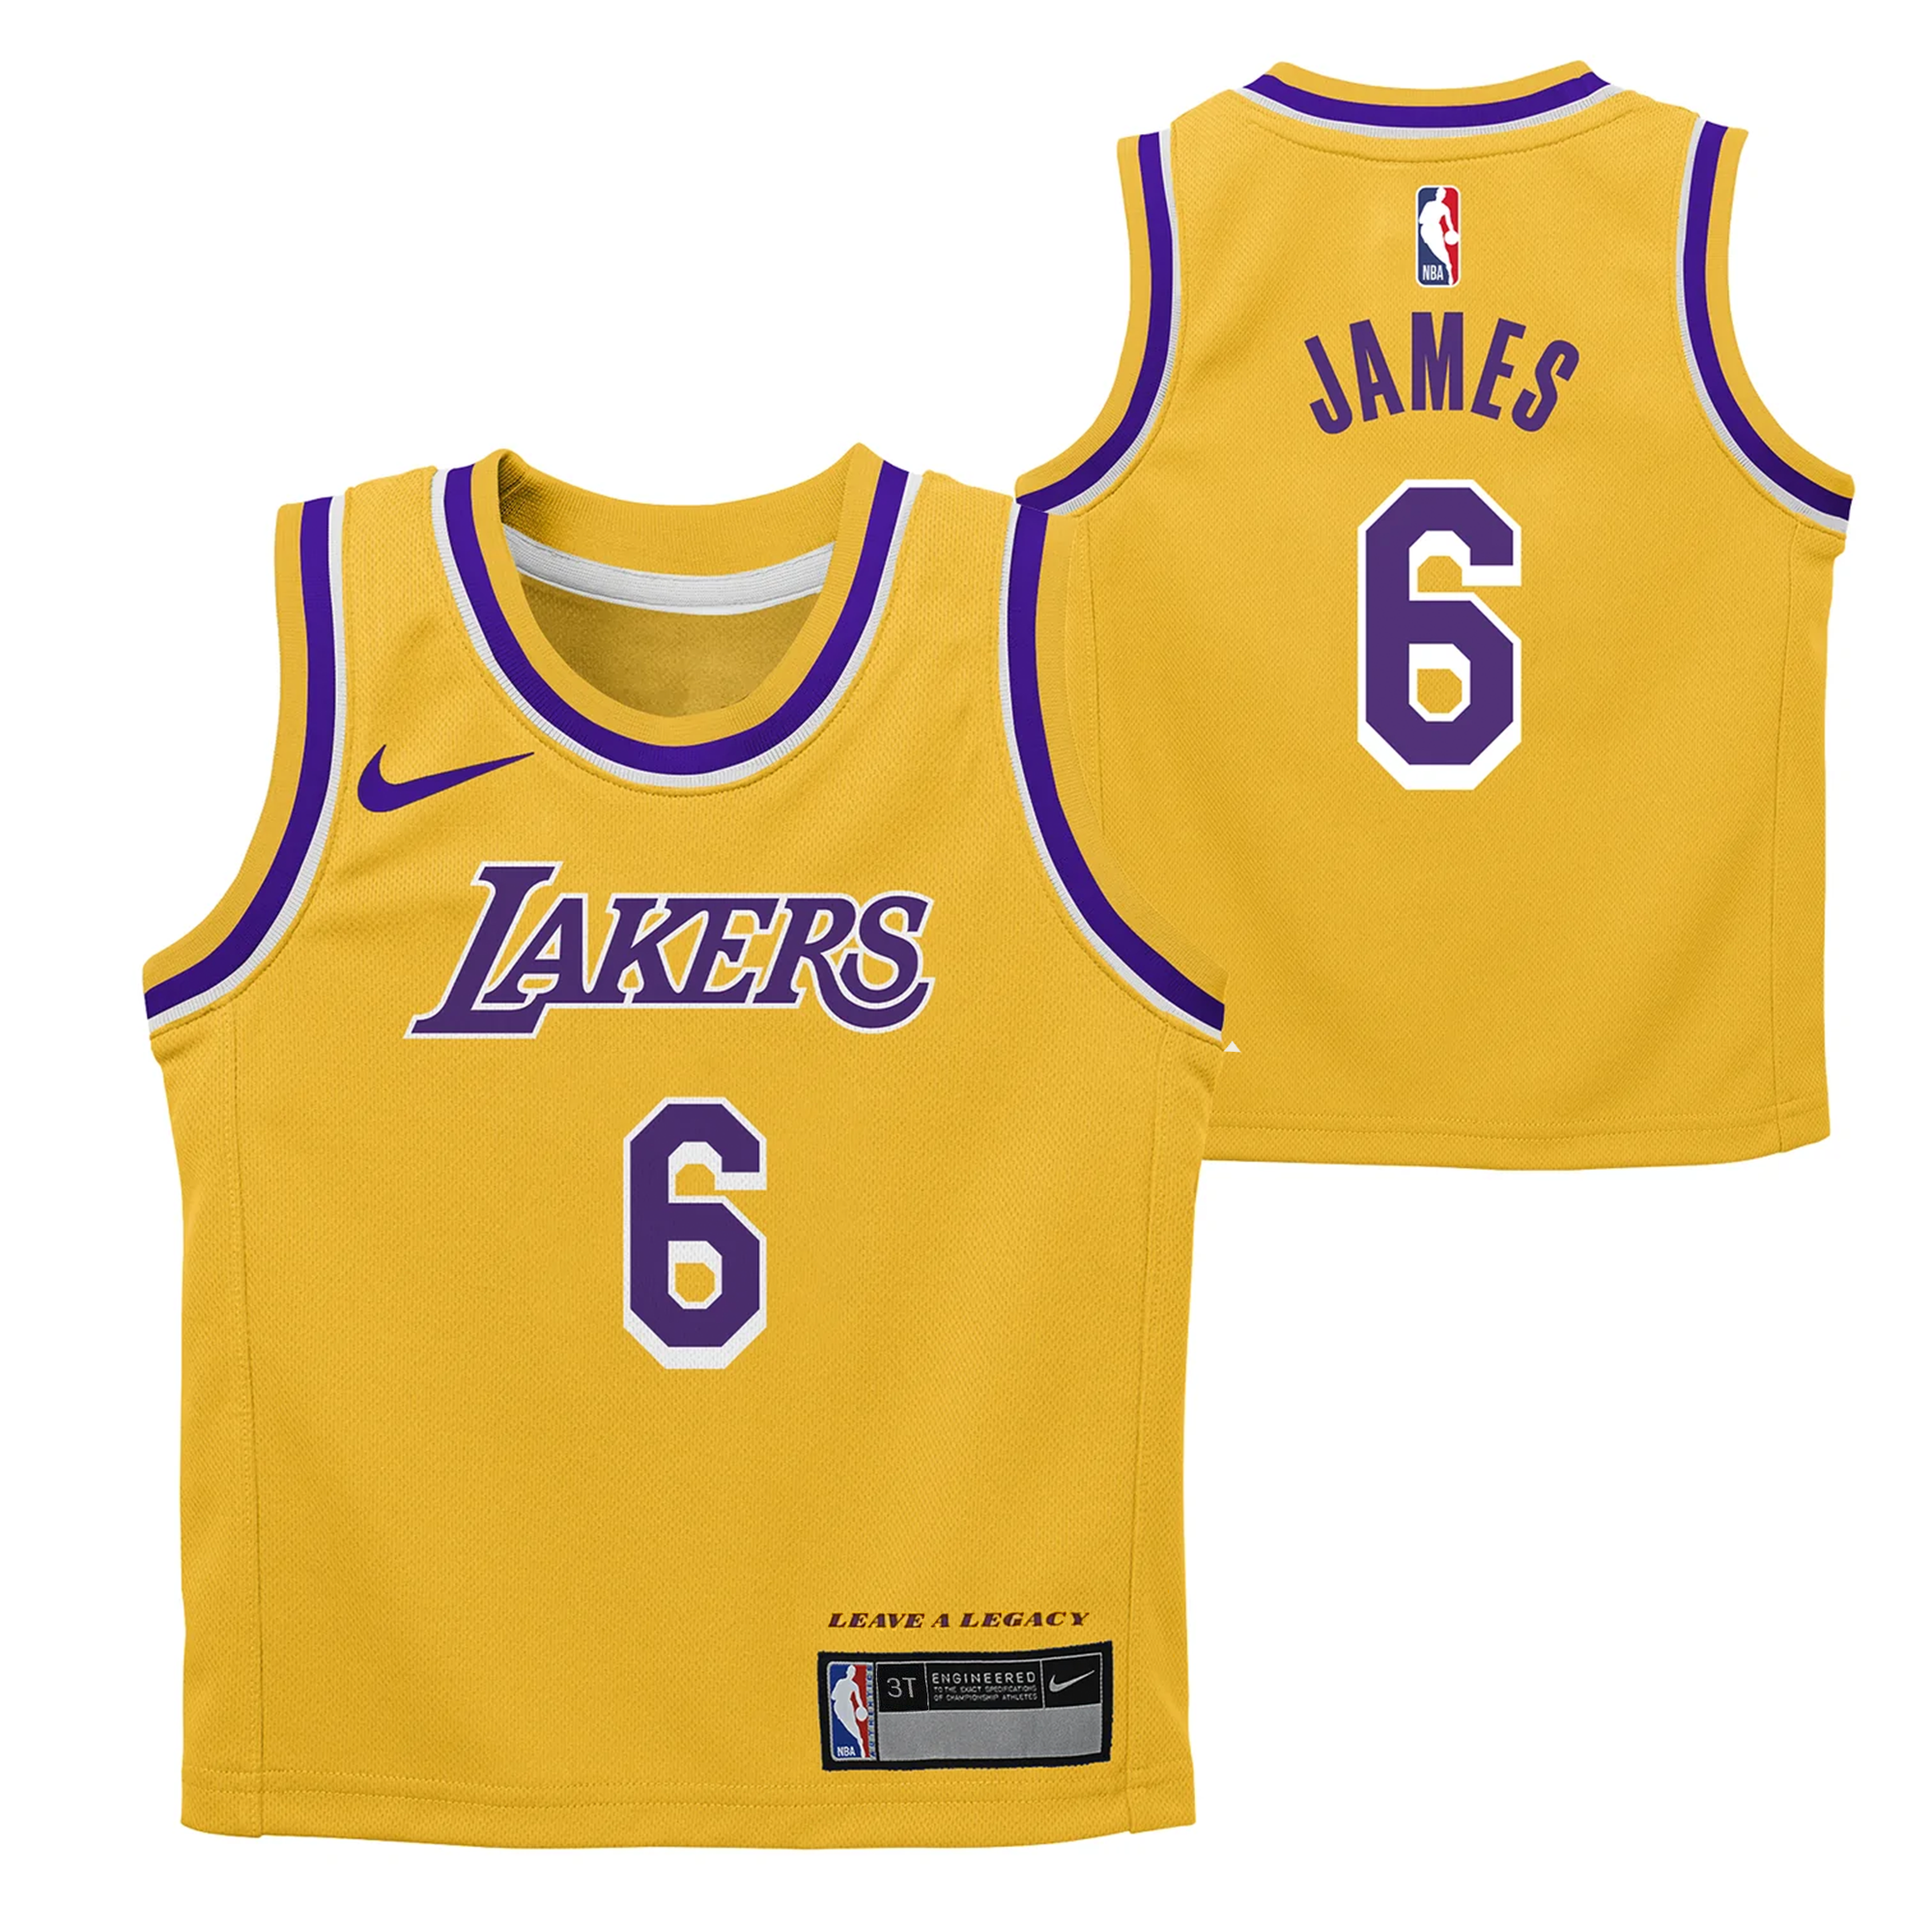 INTER FAST NBA L.A Lakers James # 23 basketball, short-sleeved